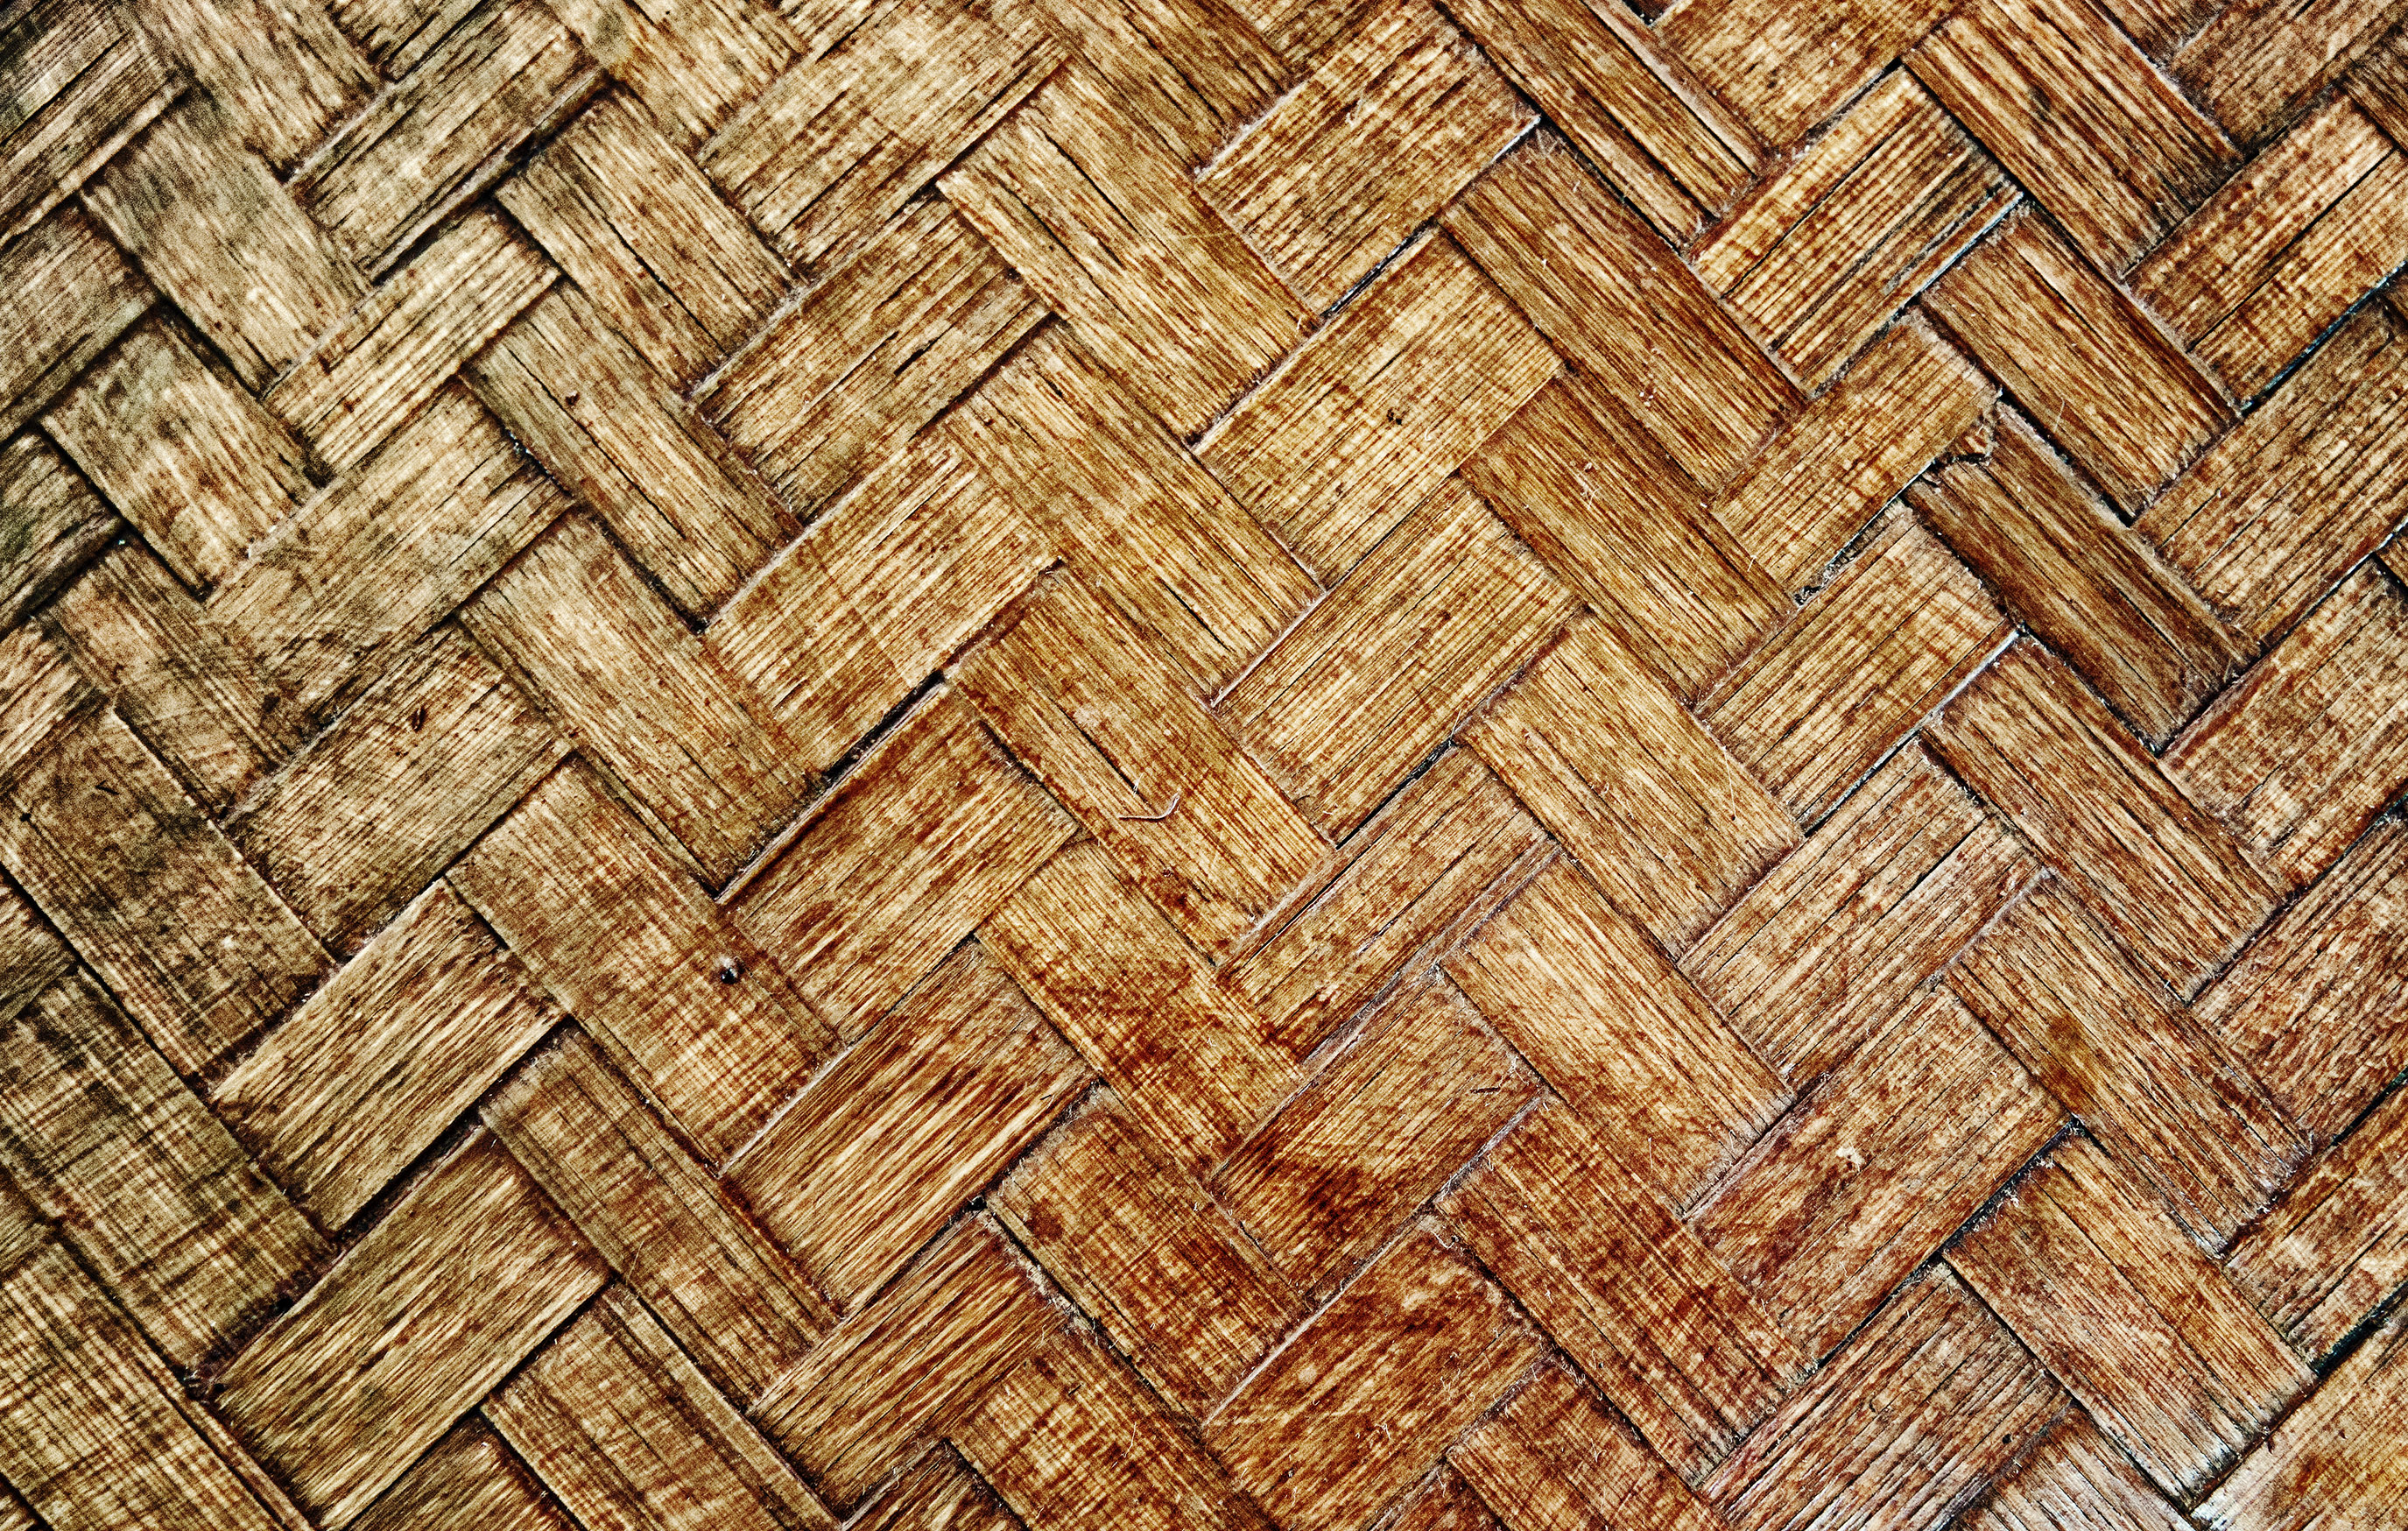 background of woven straw thatch as roof texture | www ...
